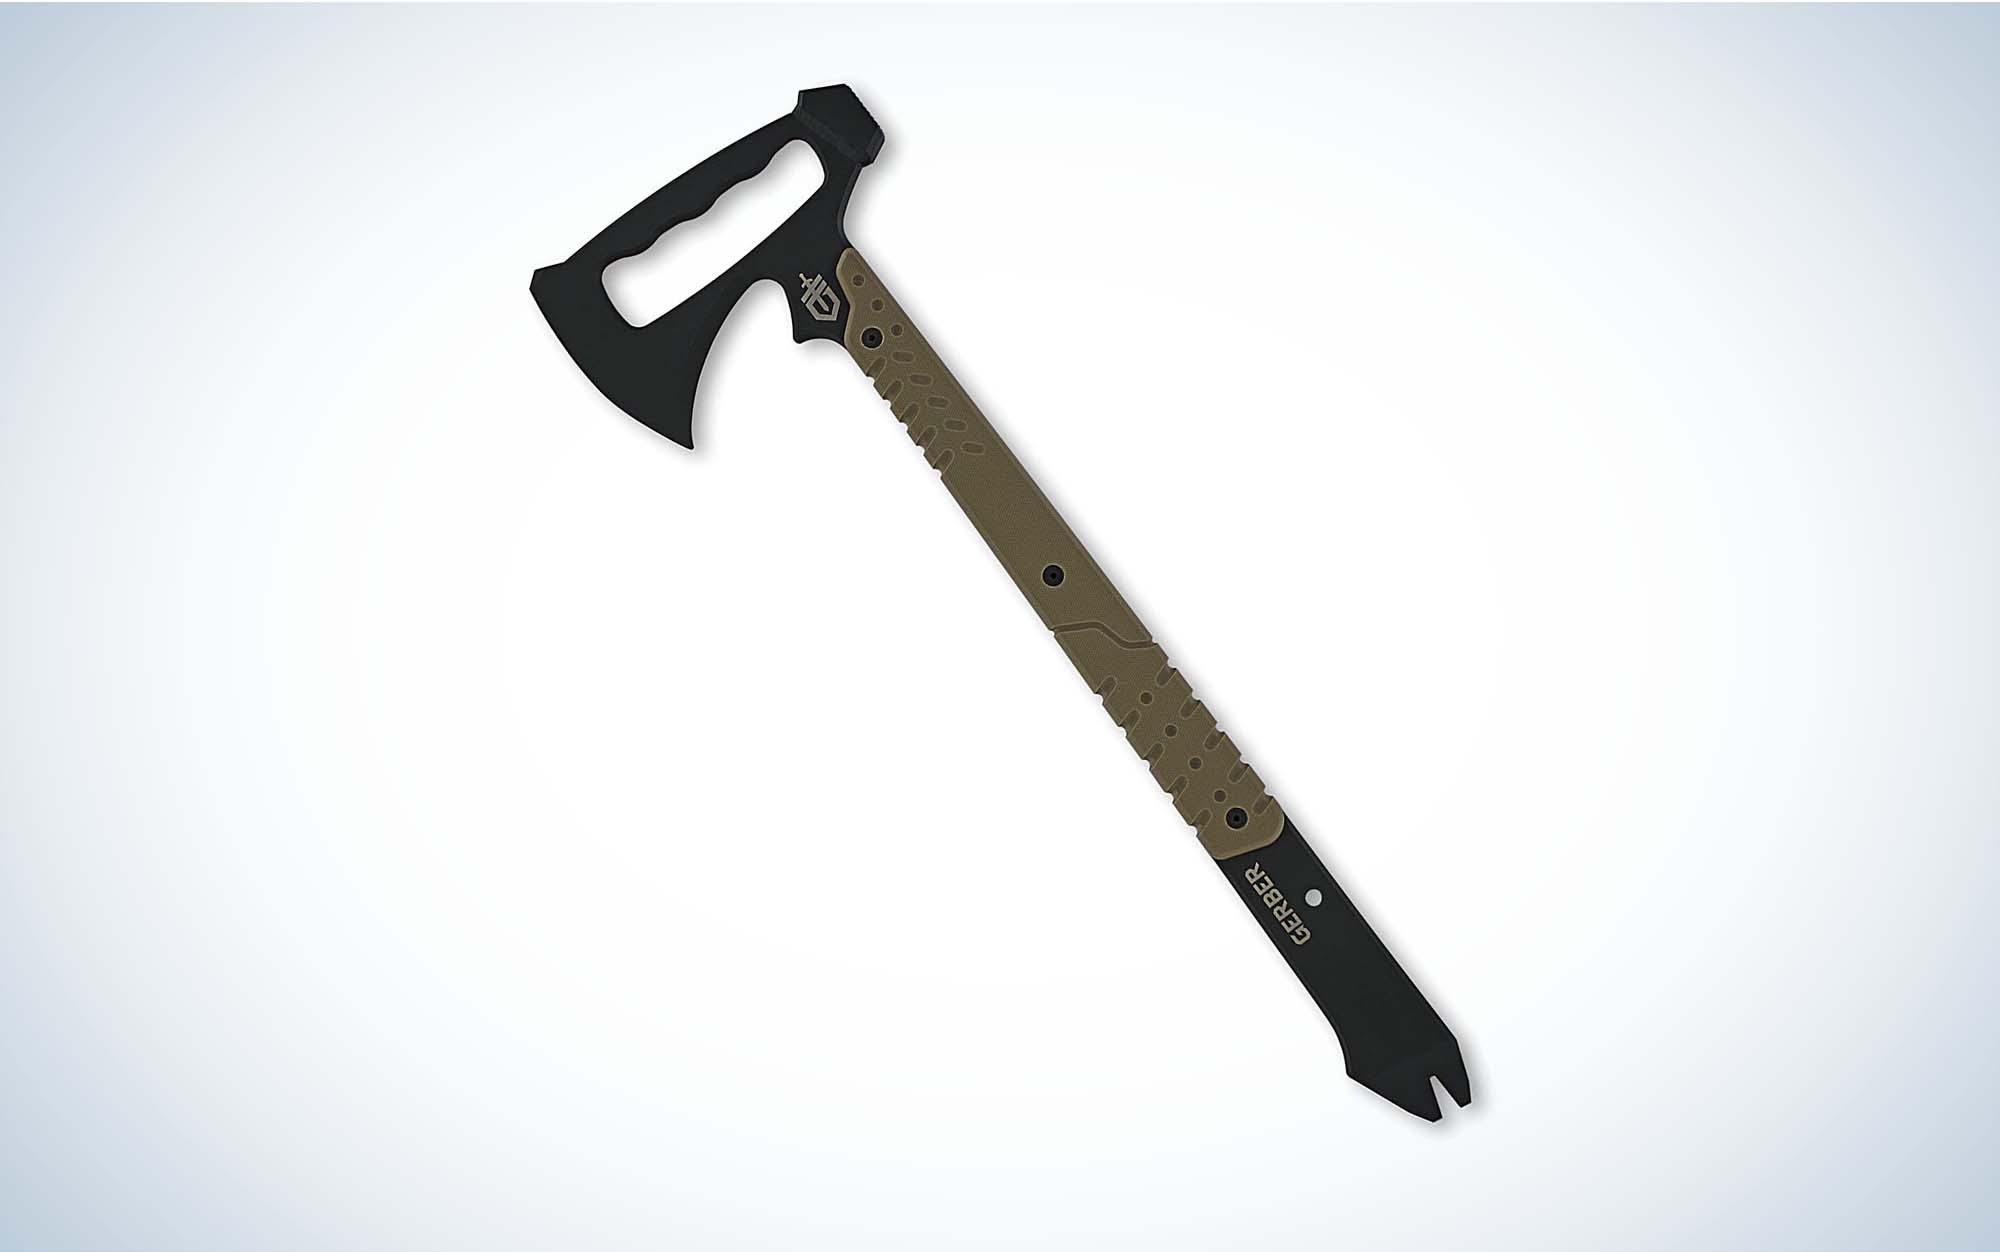 The Gerber Downrange Tactical TomahawkÂ is the best overall tomahawk.